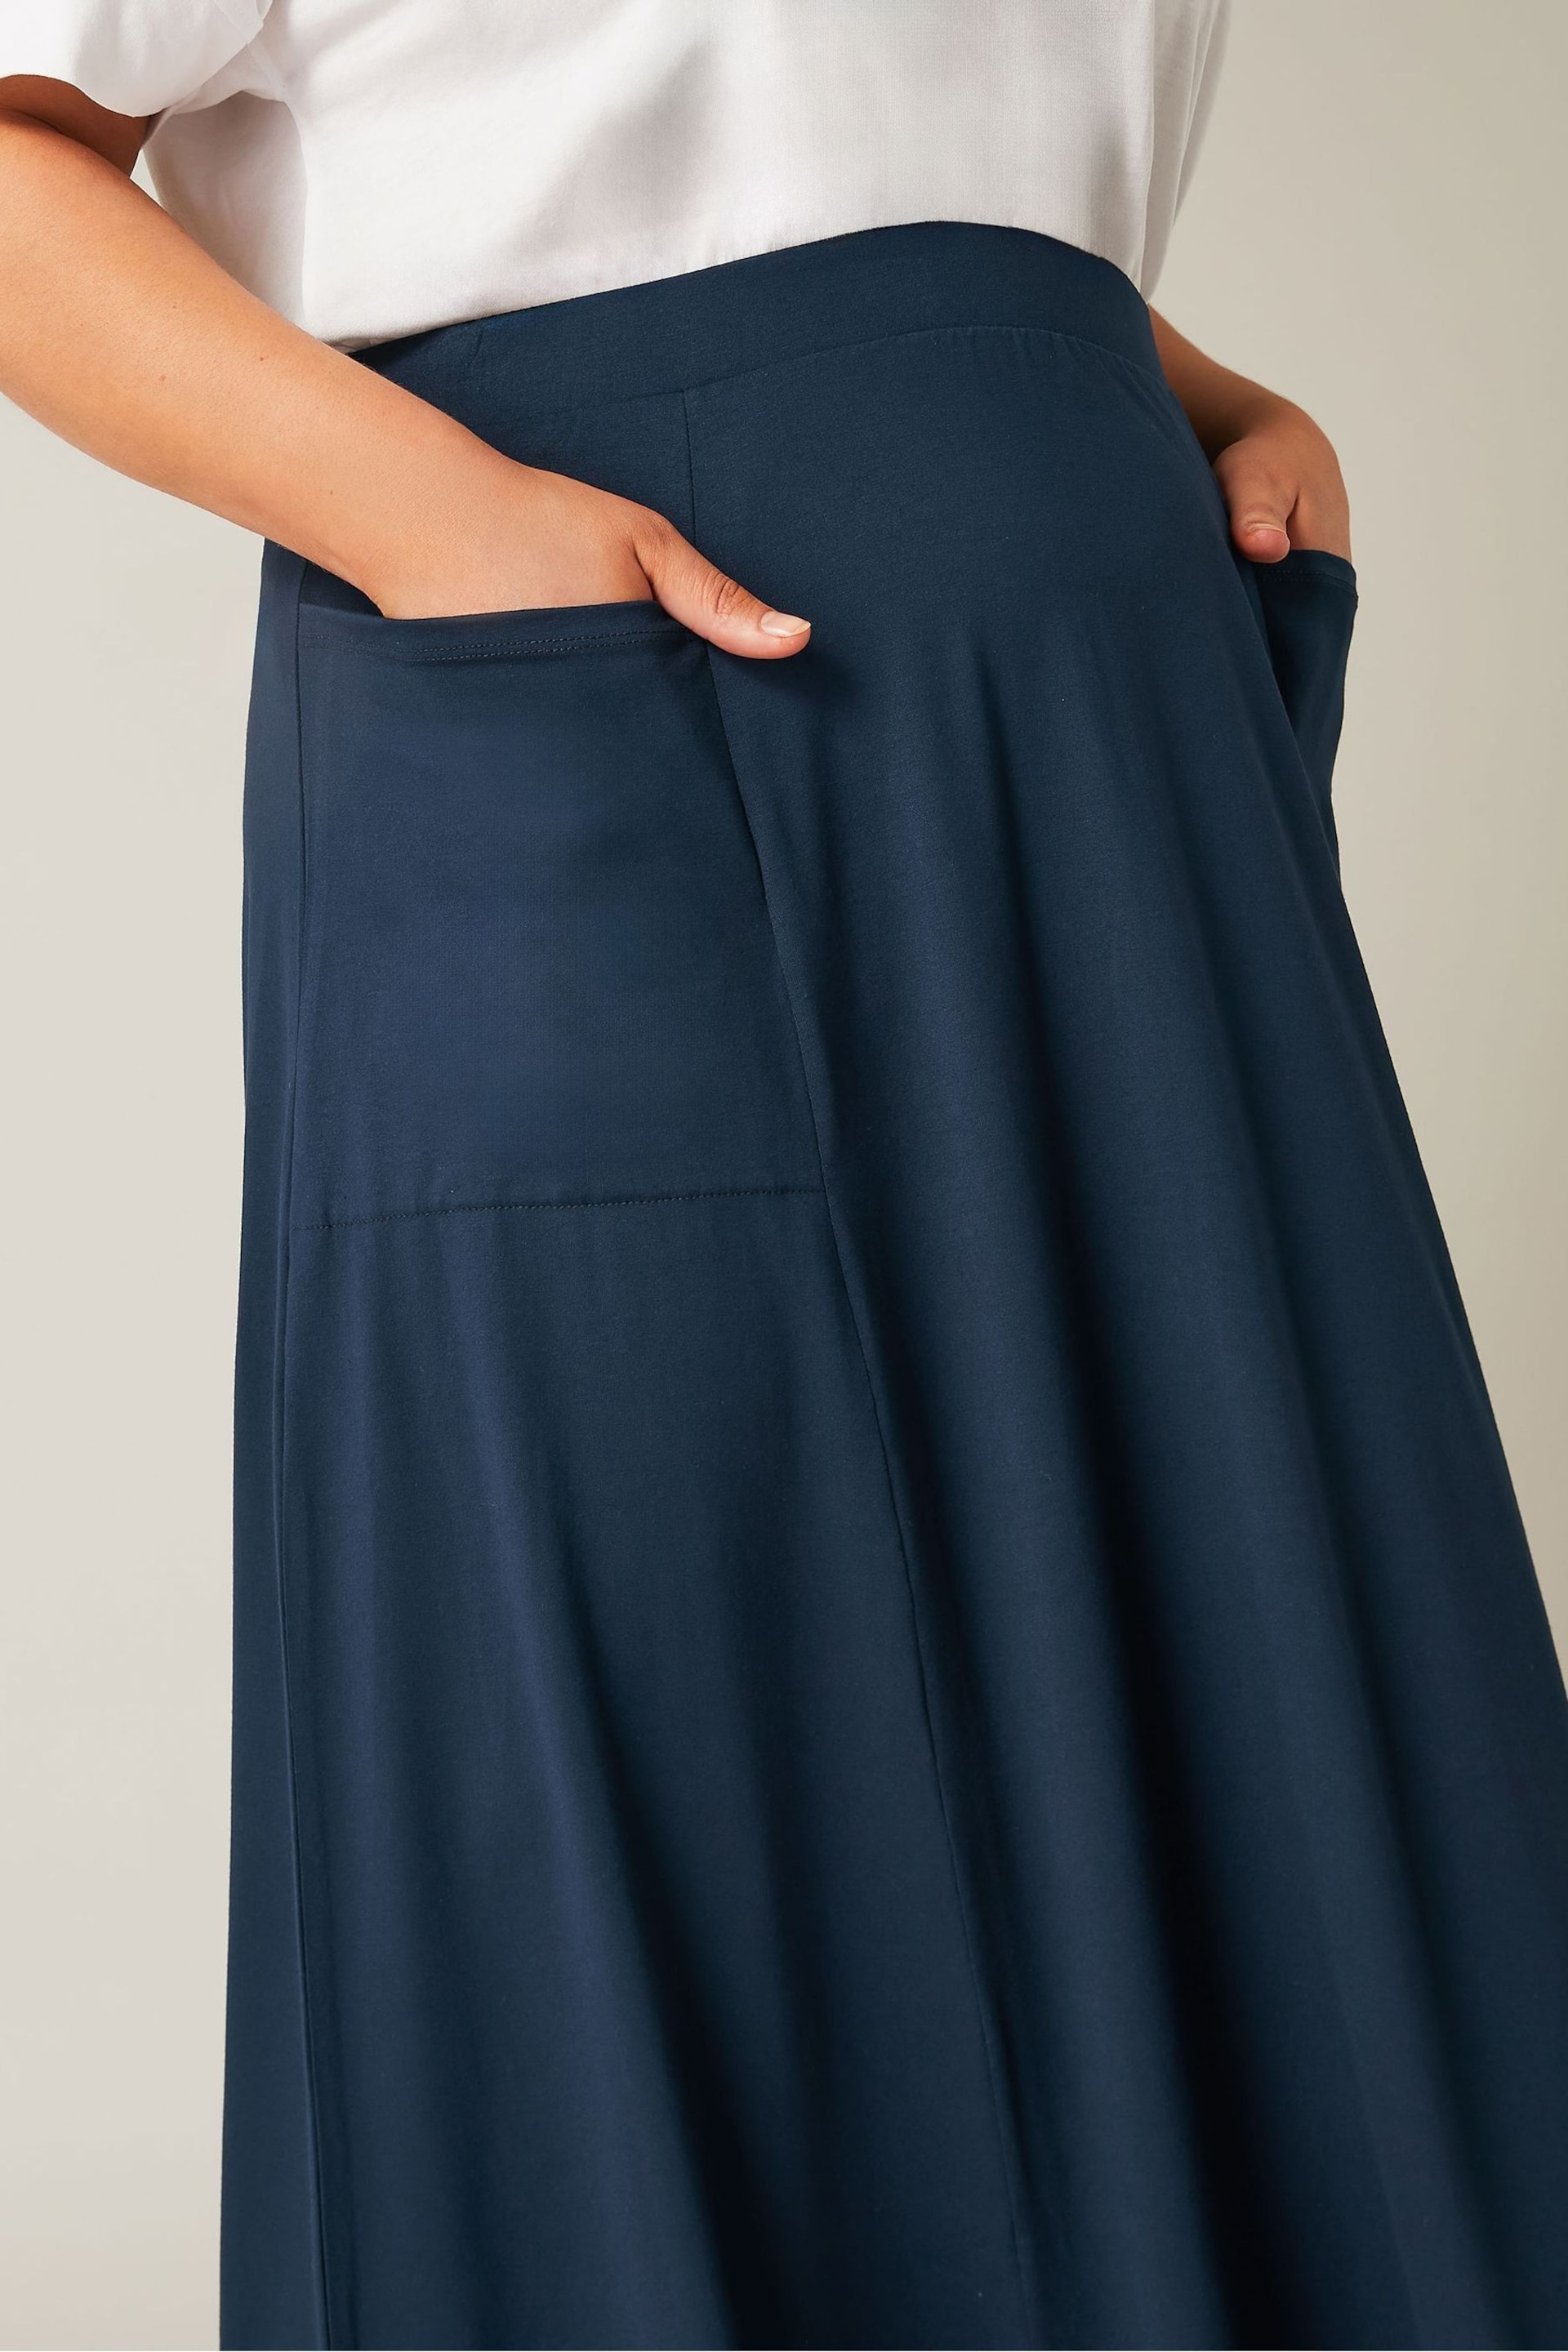 Evans Curve Maxi Skirt - Image 4 of 5